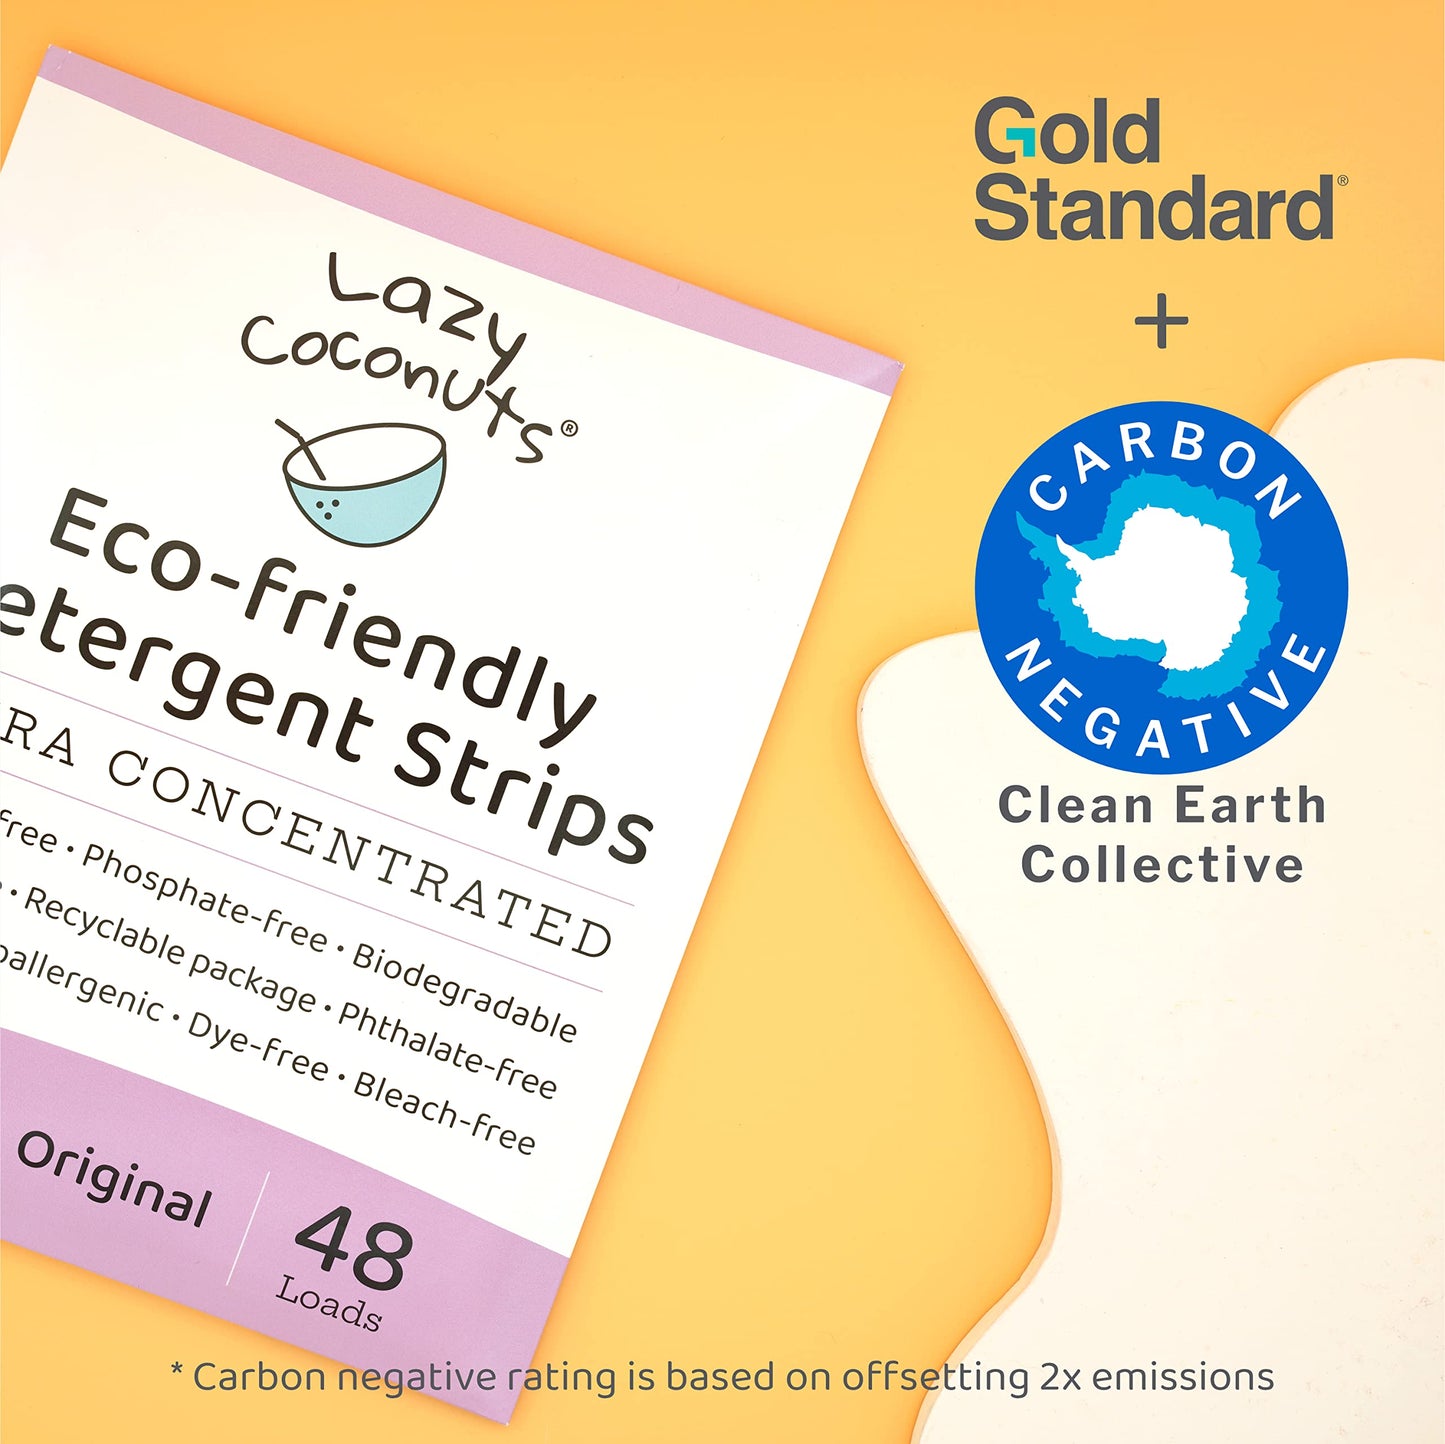 Plant Powered Laundry Detergent Strips - Plastic Free | Lazy Coconuts